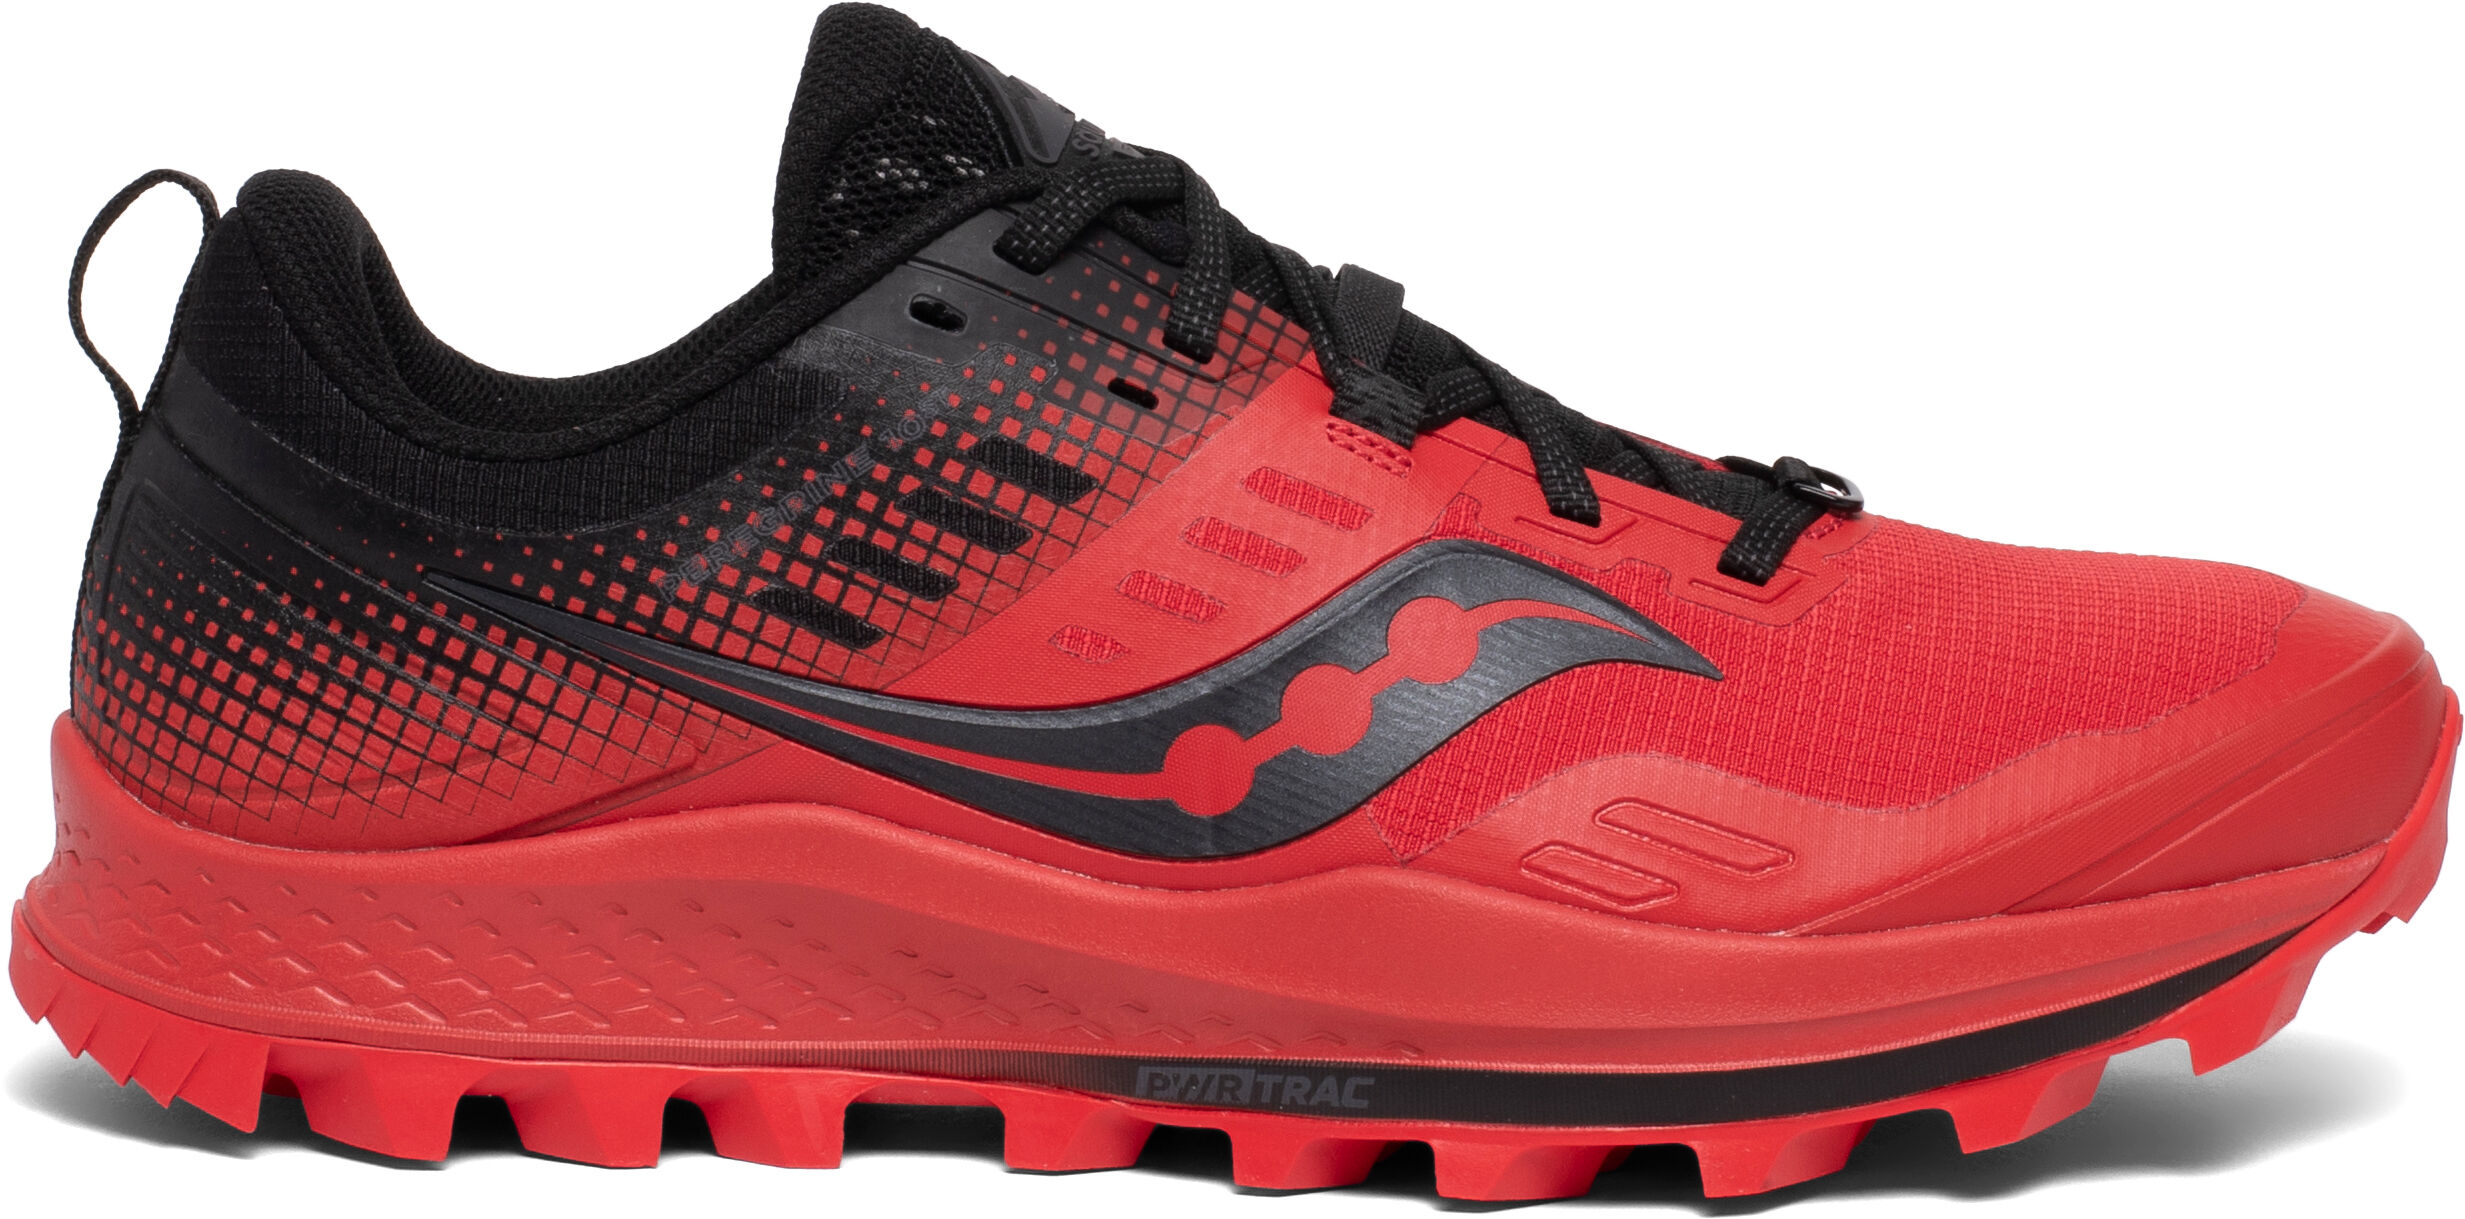 Saucony Peregrine 10 St - Trail Running shoes - Men's